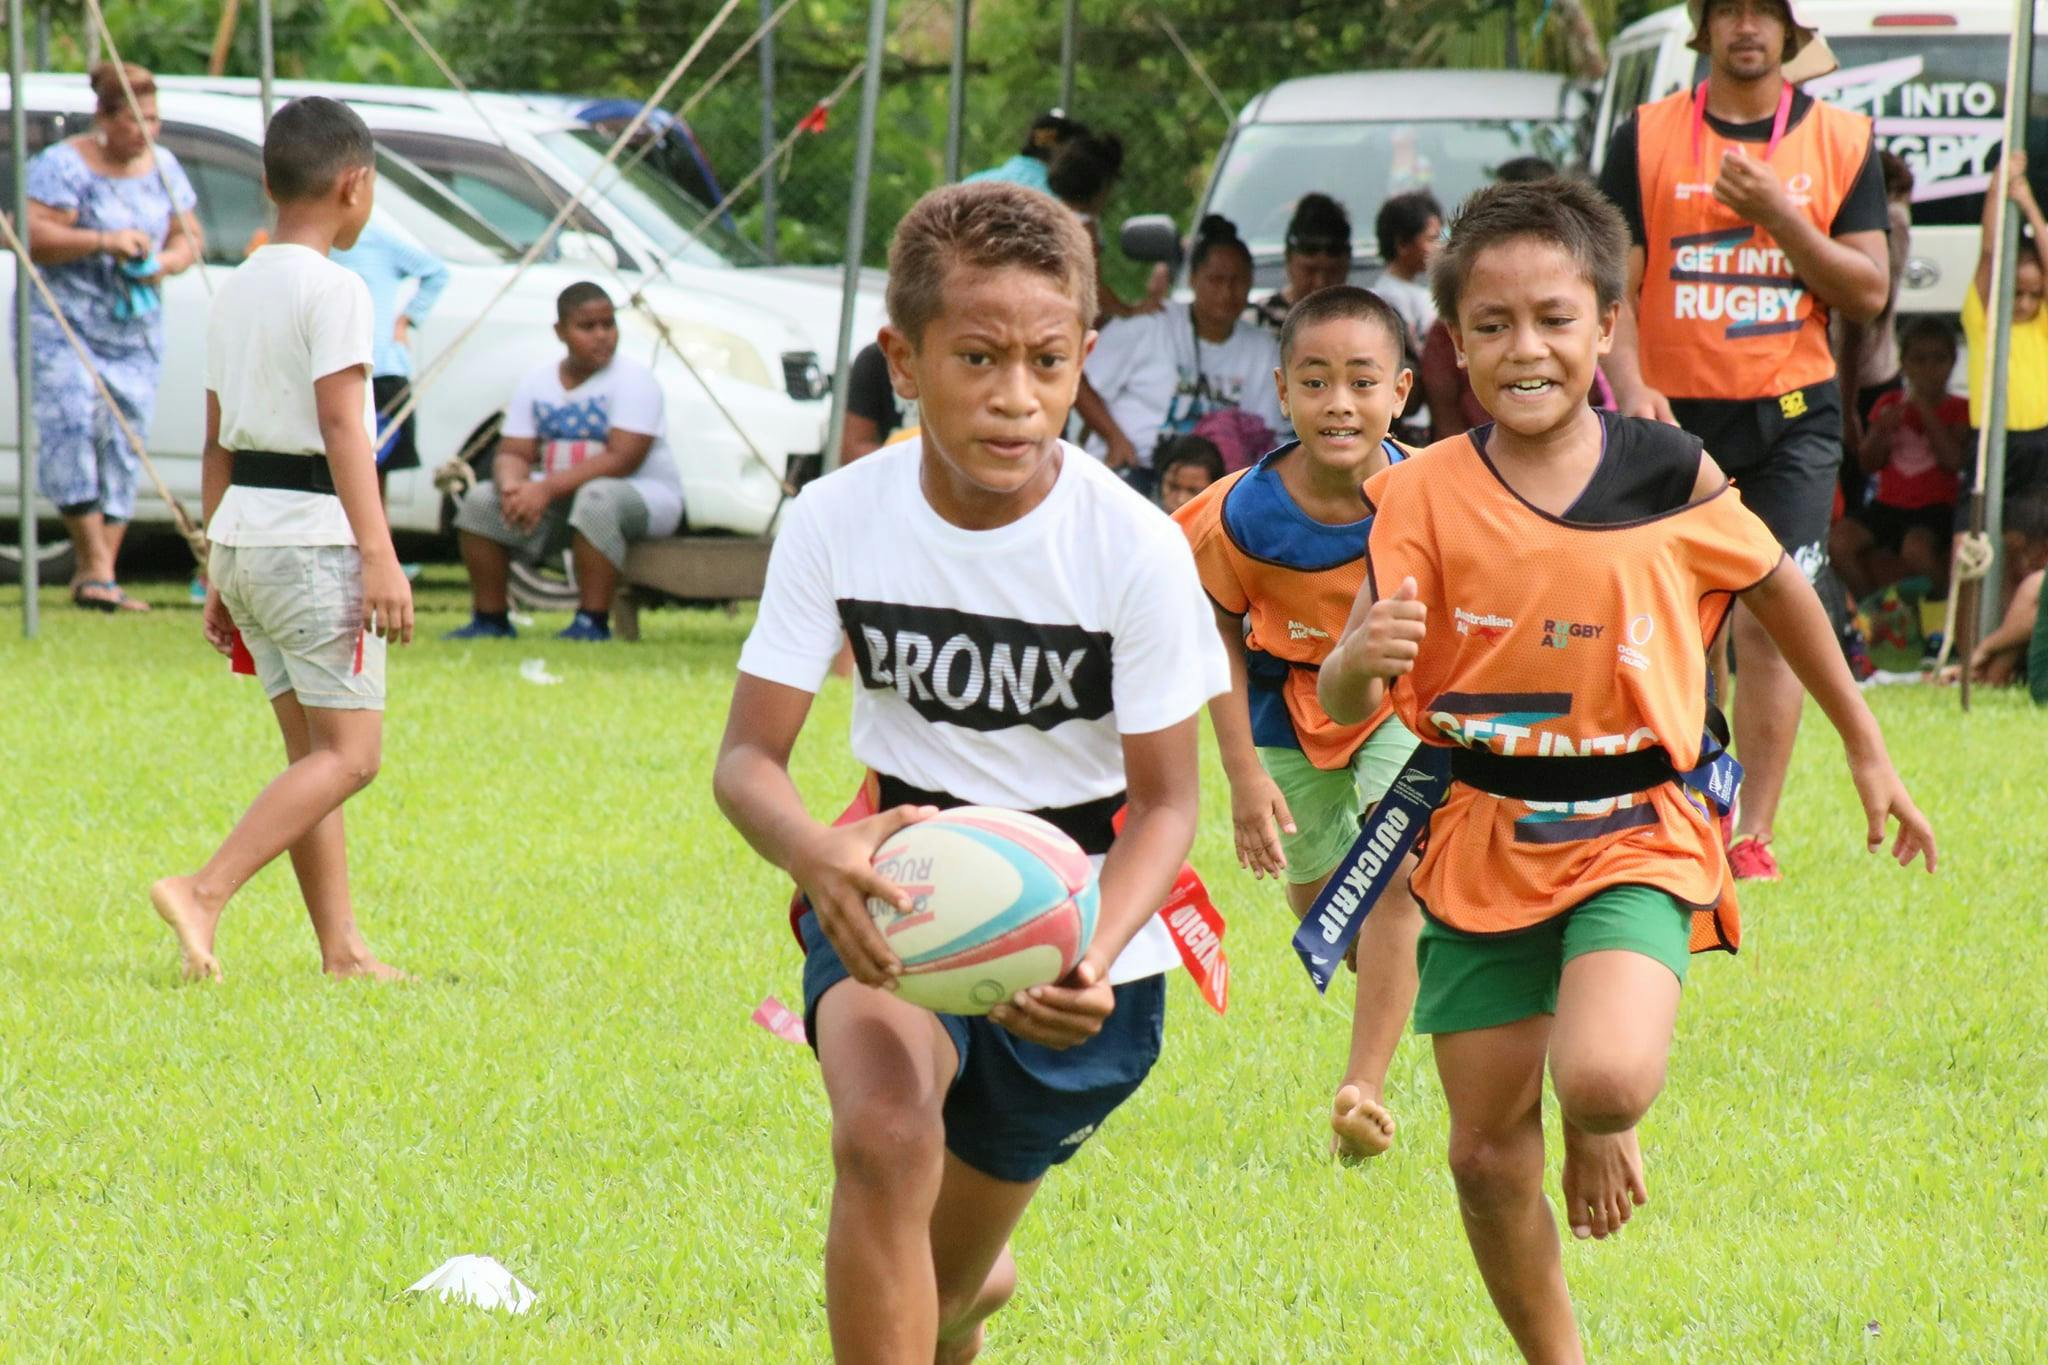 Faasaleleaga District Get Into Rugby Festival March 2021